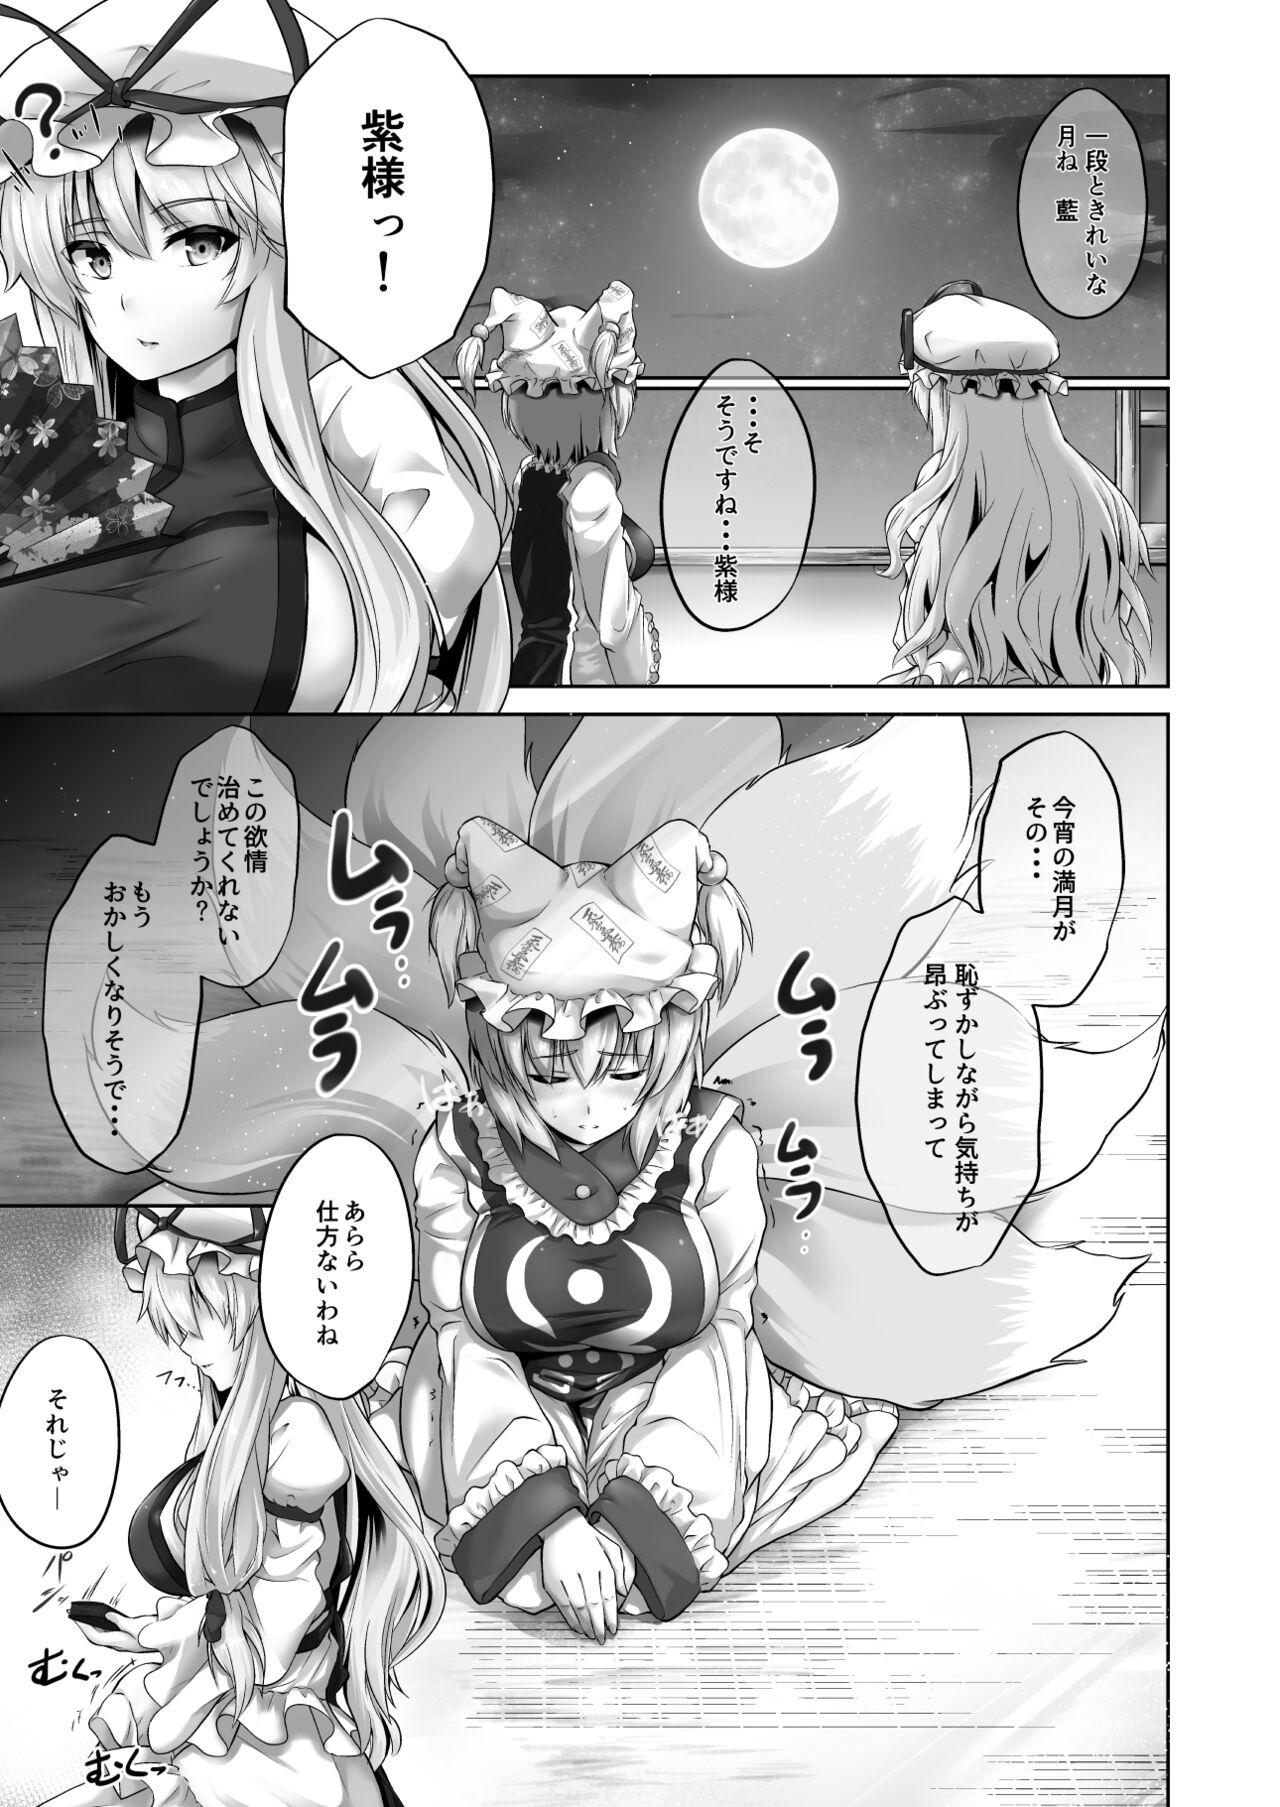 Pauzudo Participation in the "Oriental Mass Ejaculation Combination" Joint Magazine - Touhou project Flash - Picture 1